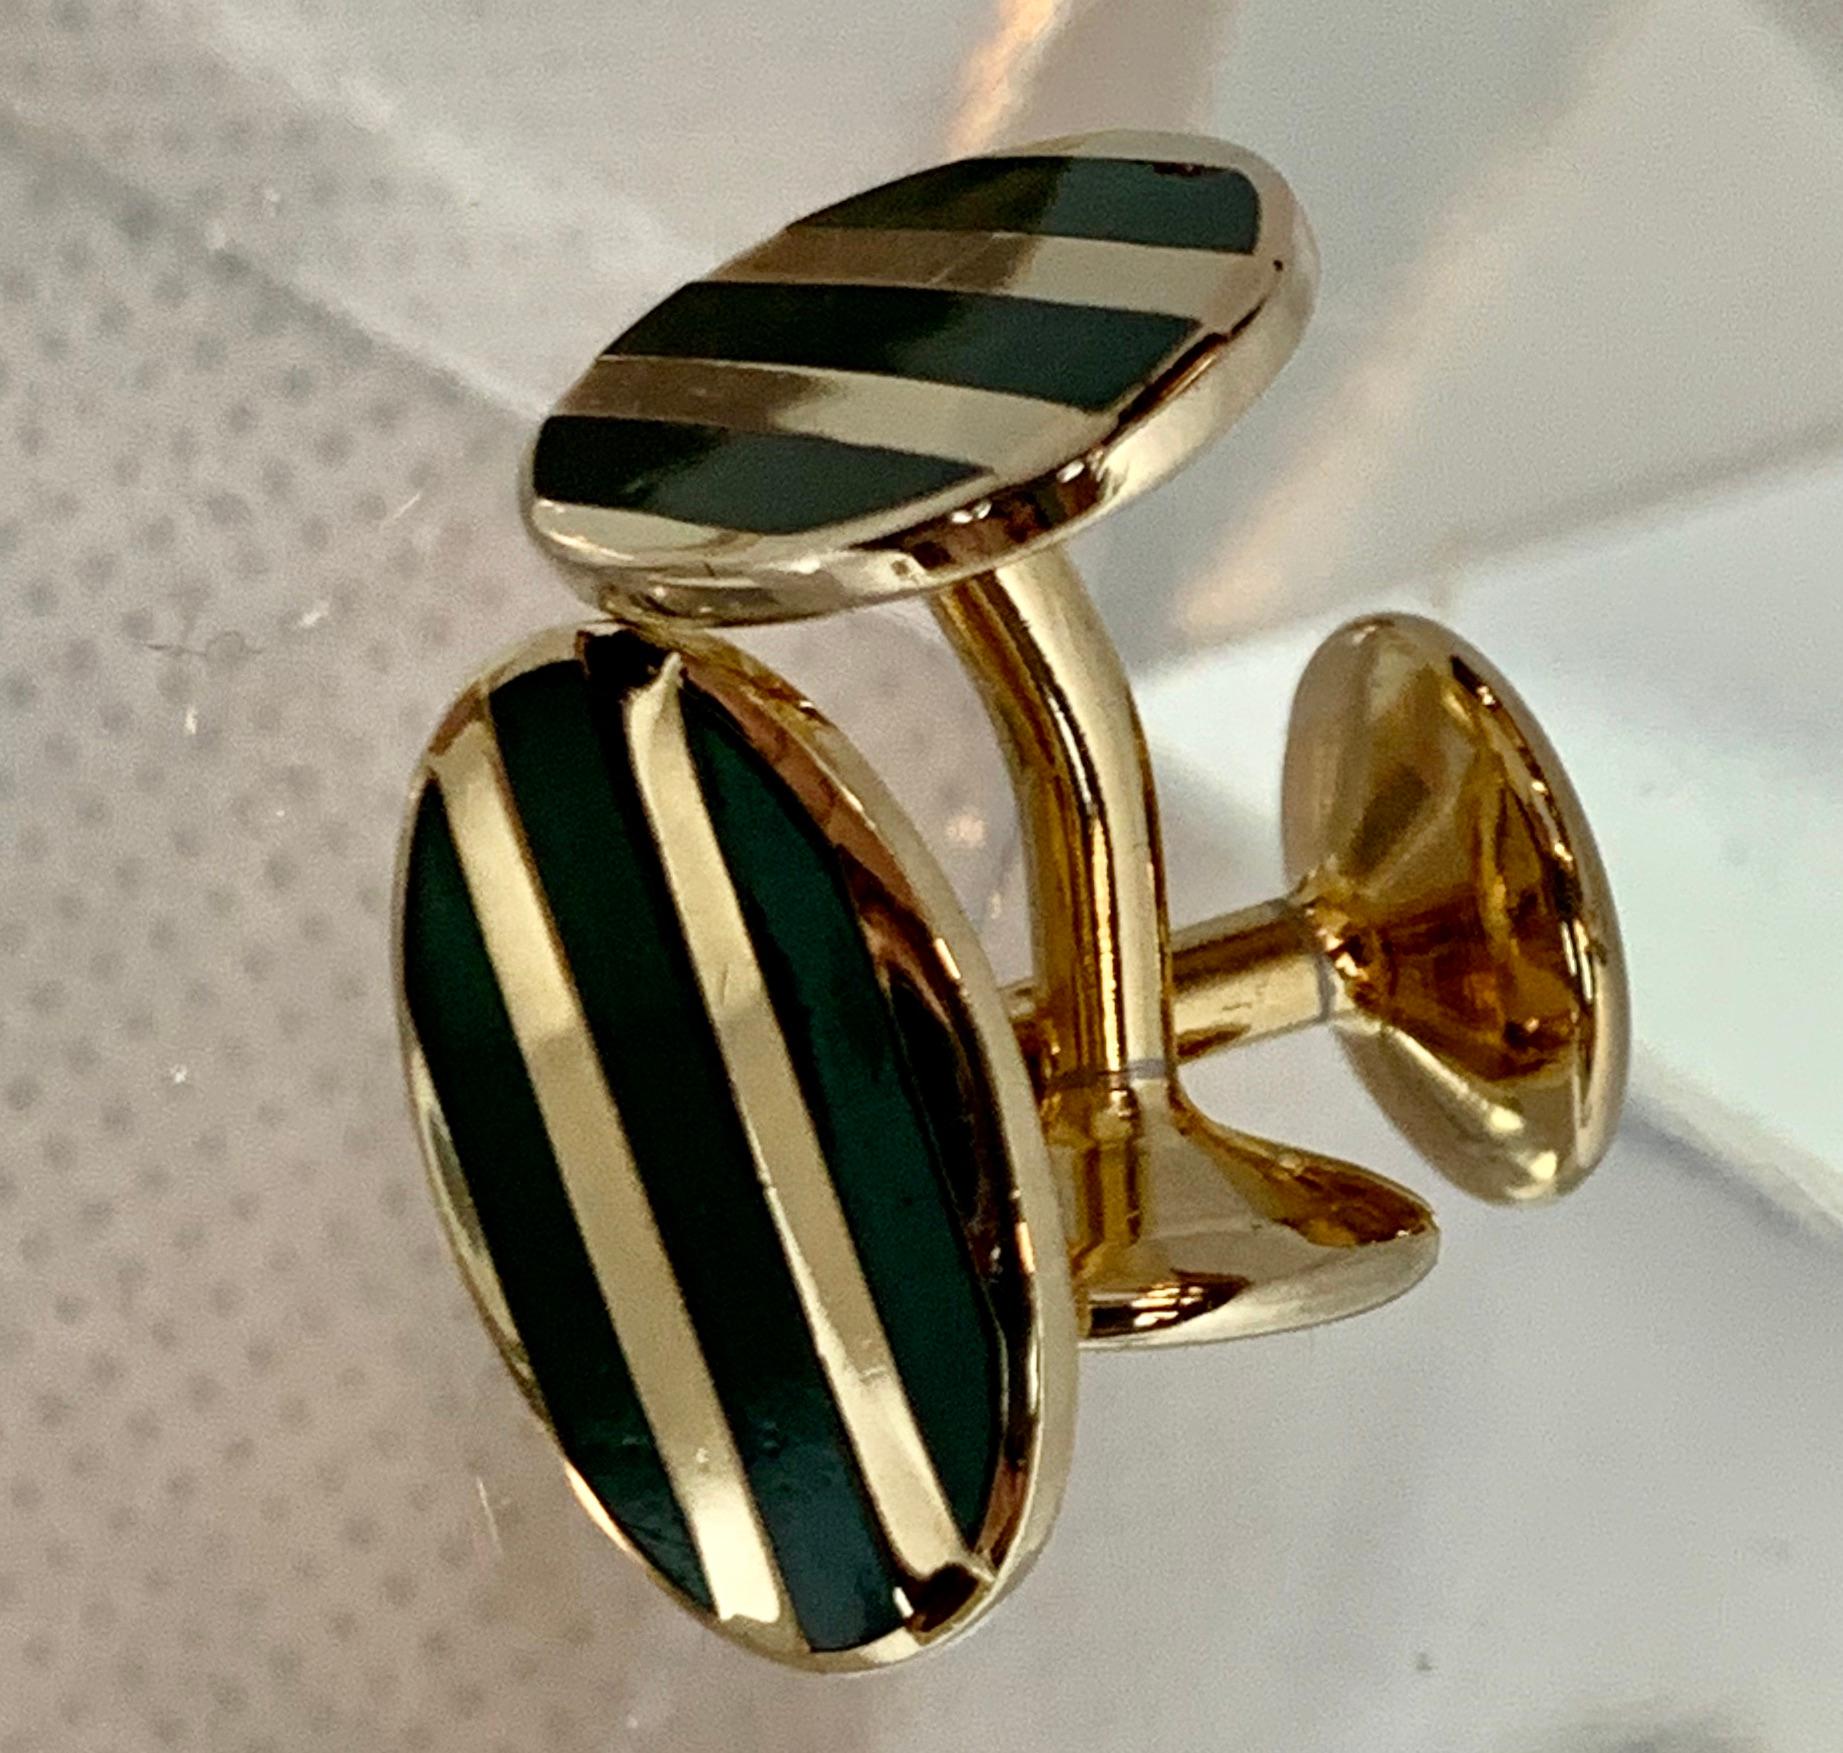 Edwardian Oval Cufflinks with High Fired Green Enamel Stripes-Gold Filled 